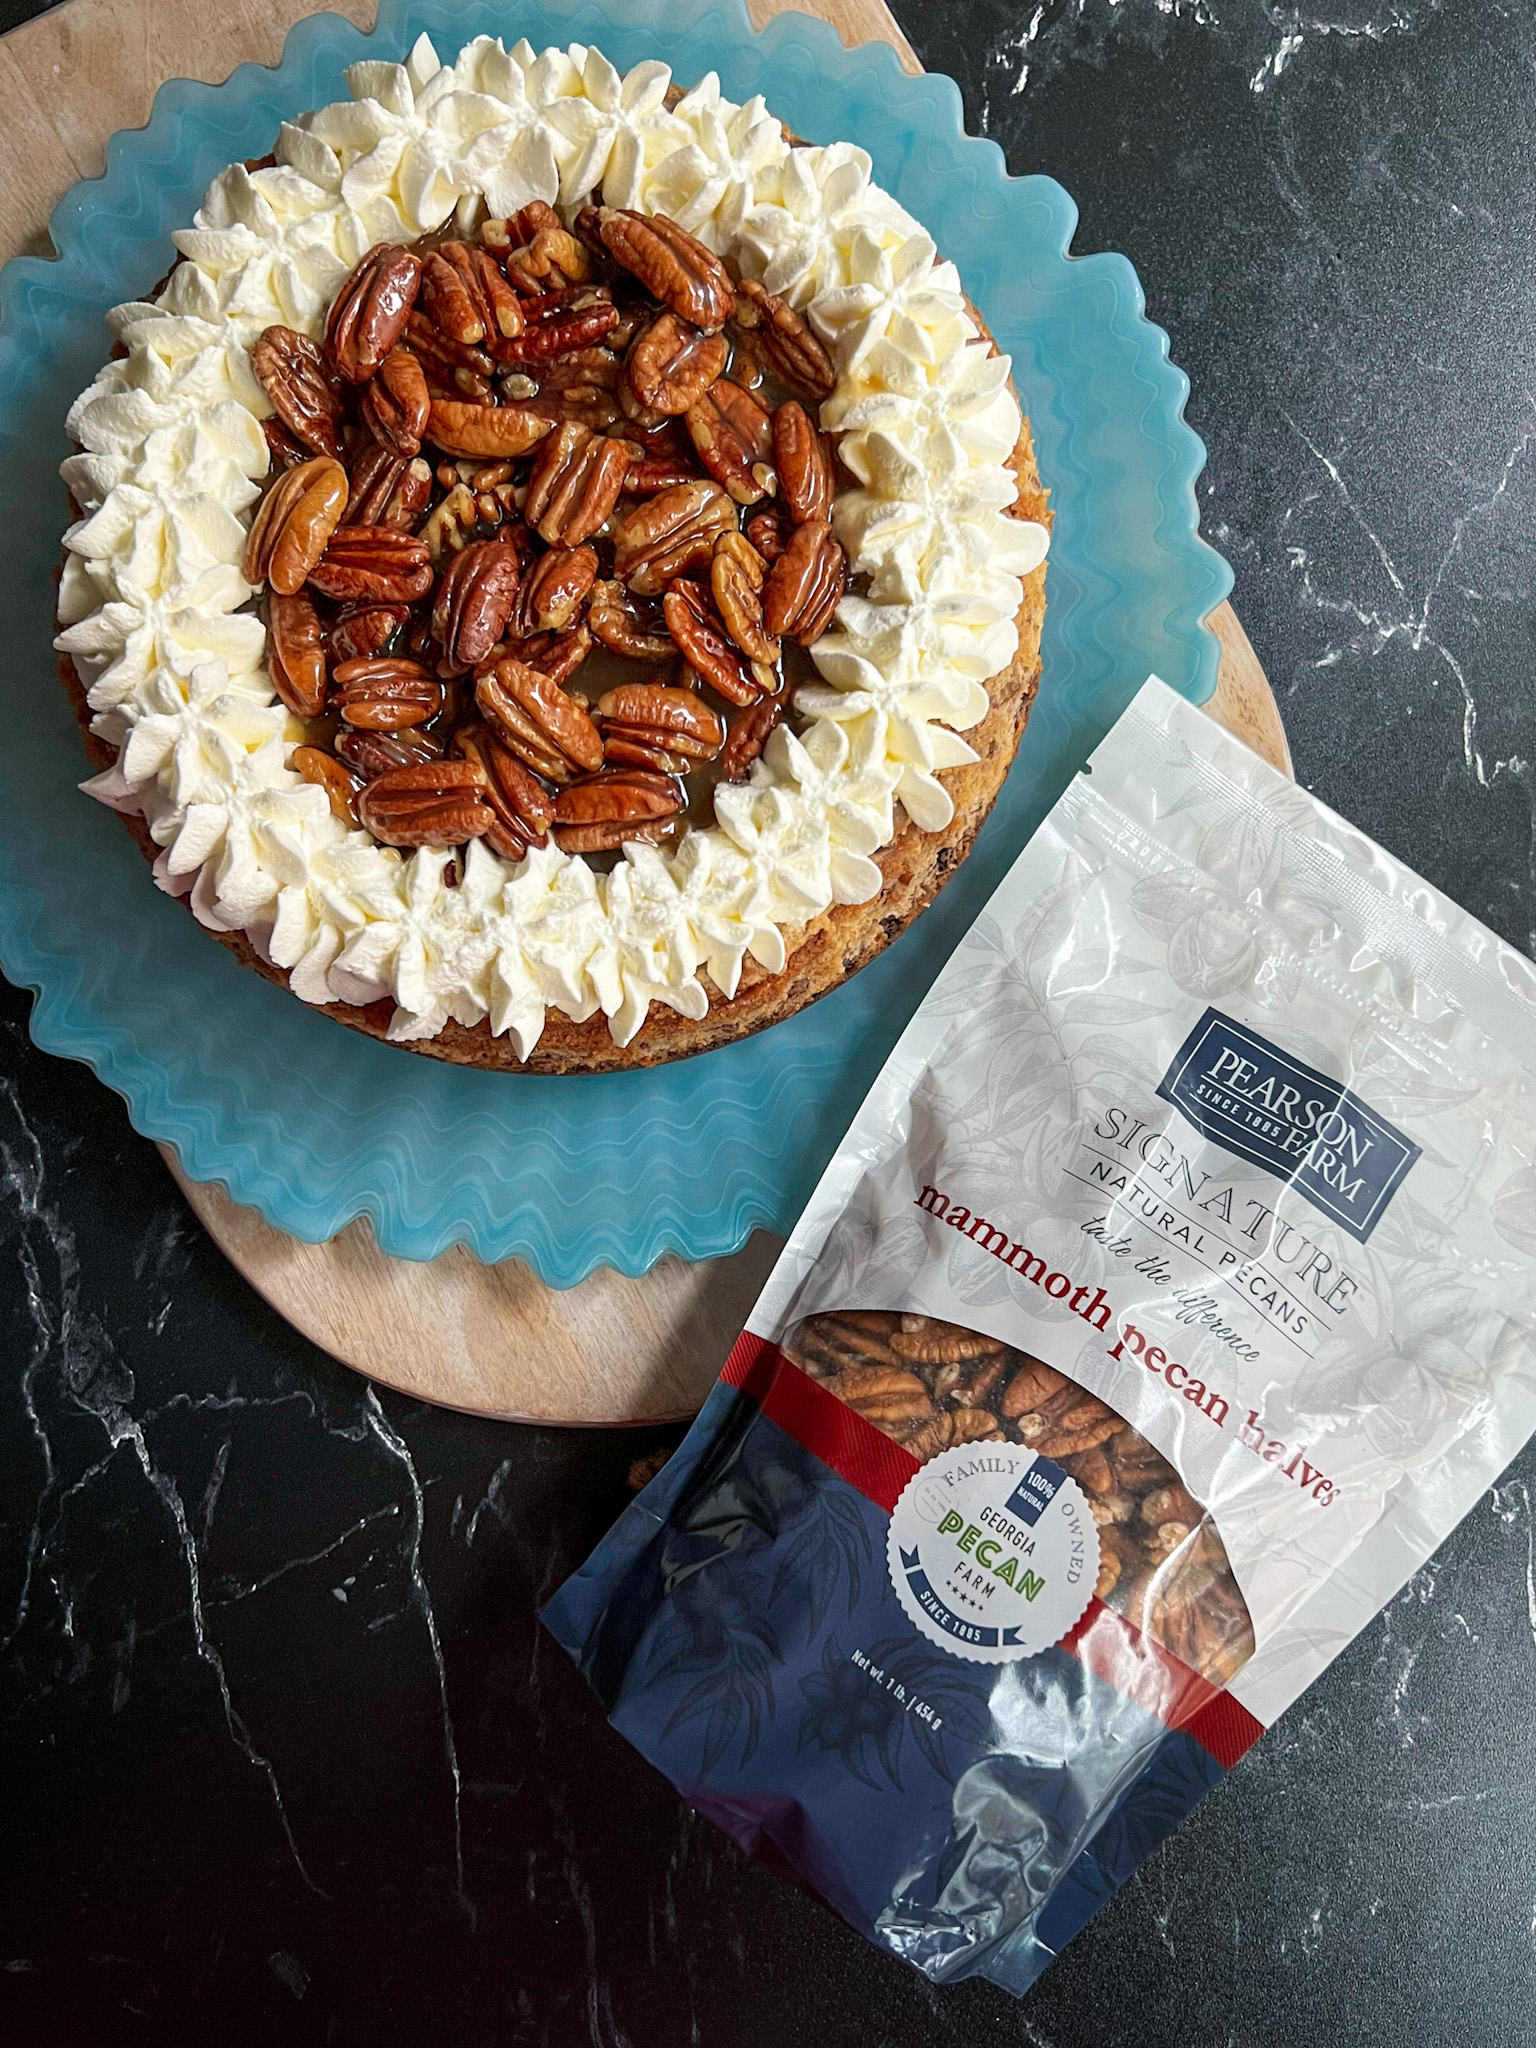 Pearson pecan bag with cheesecake